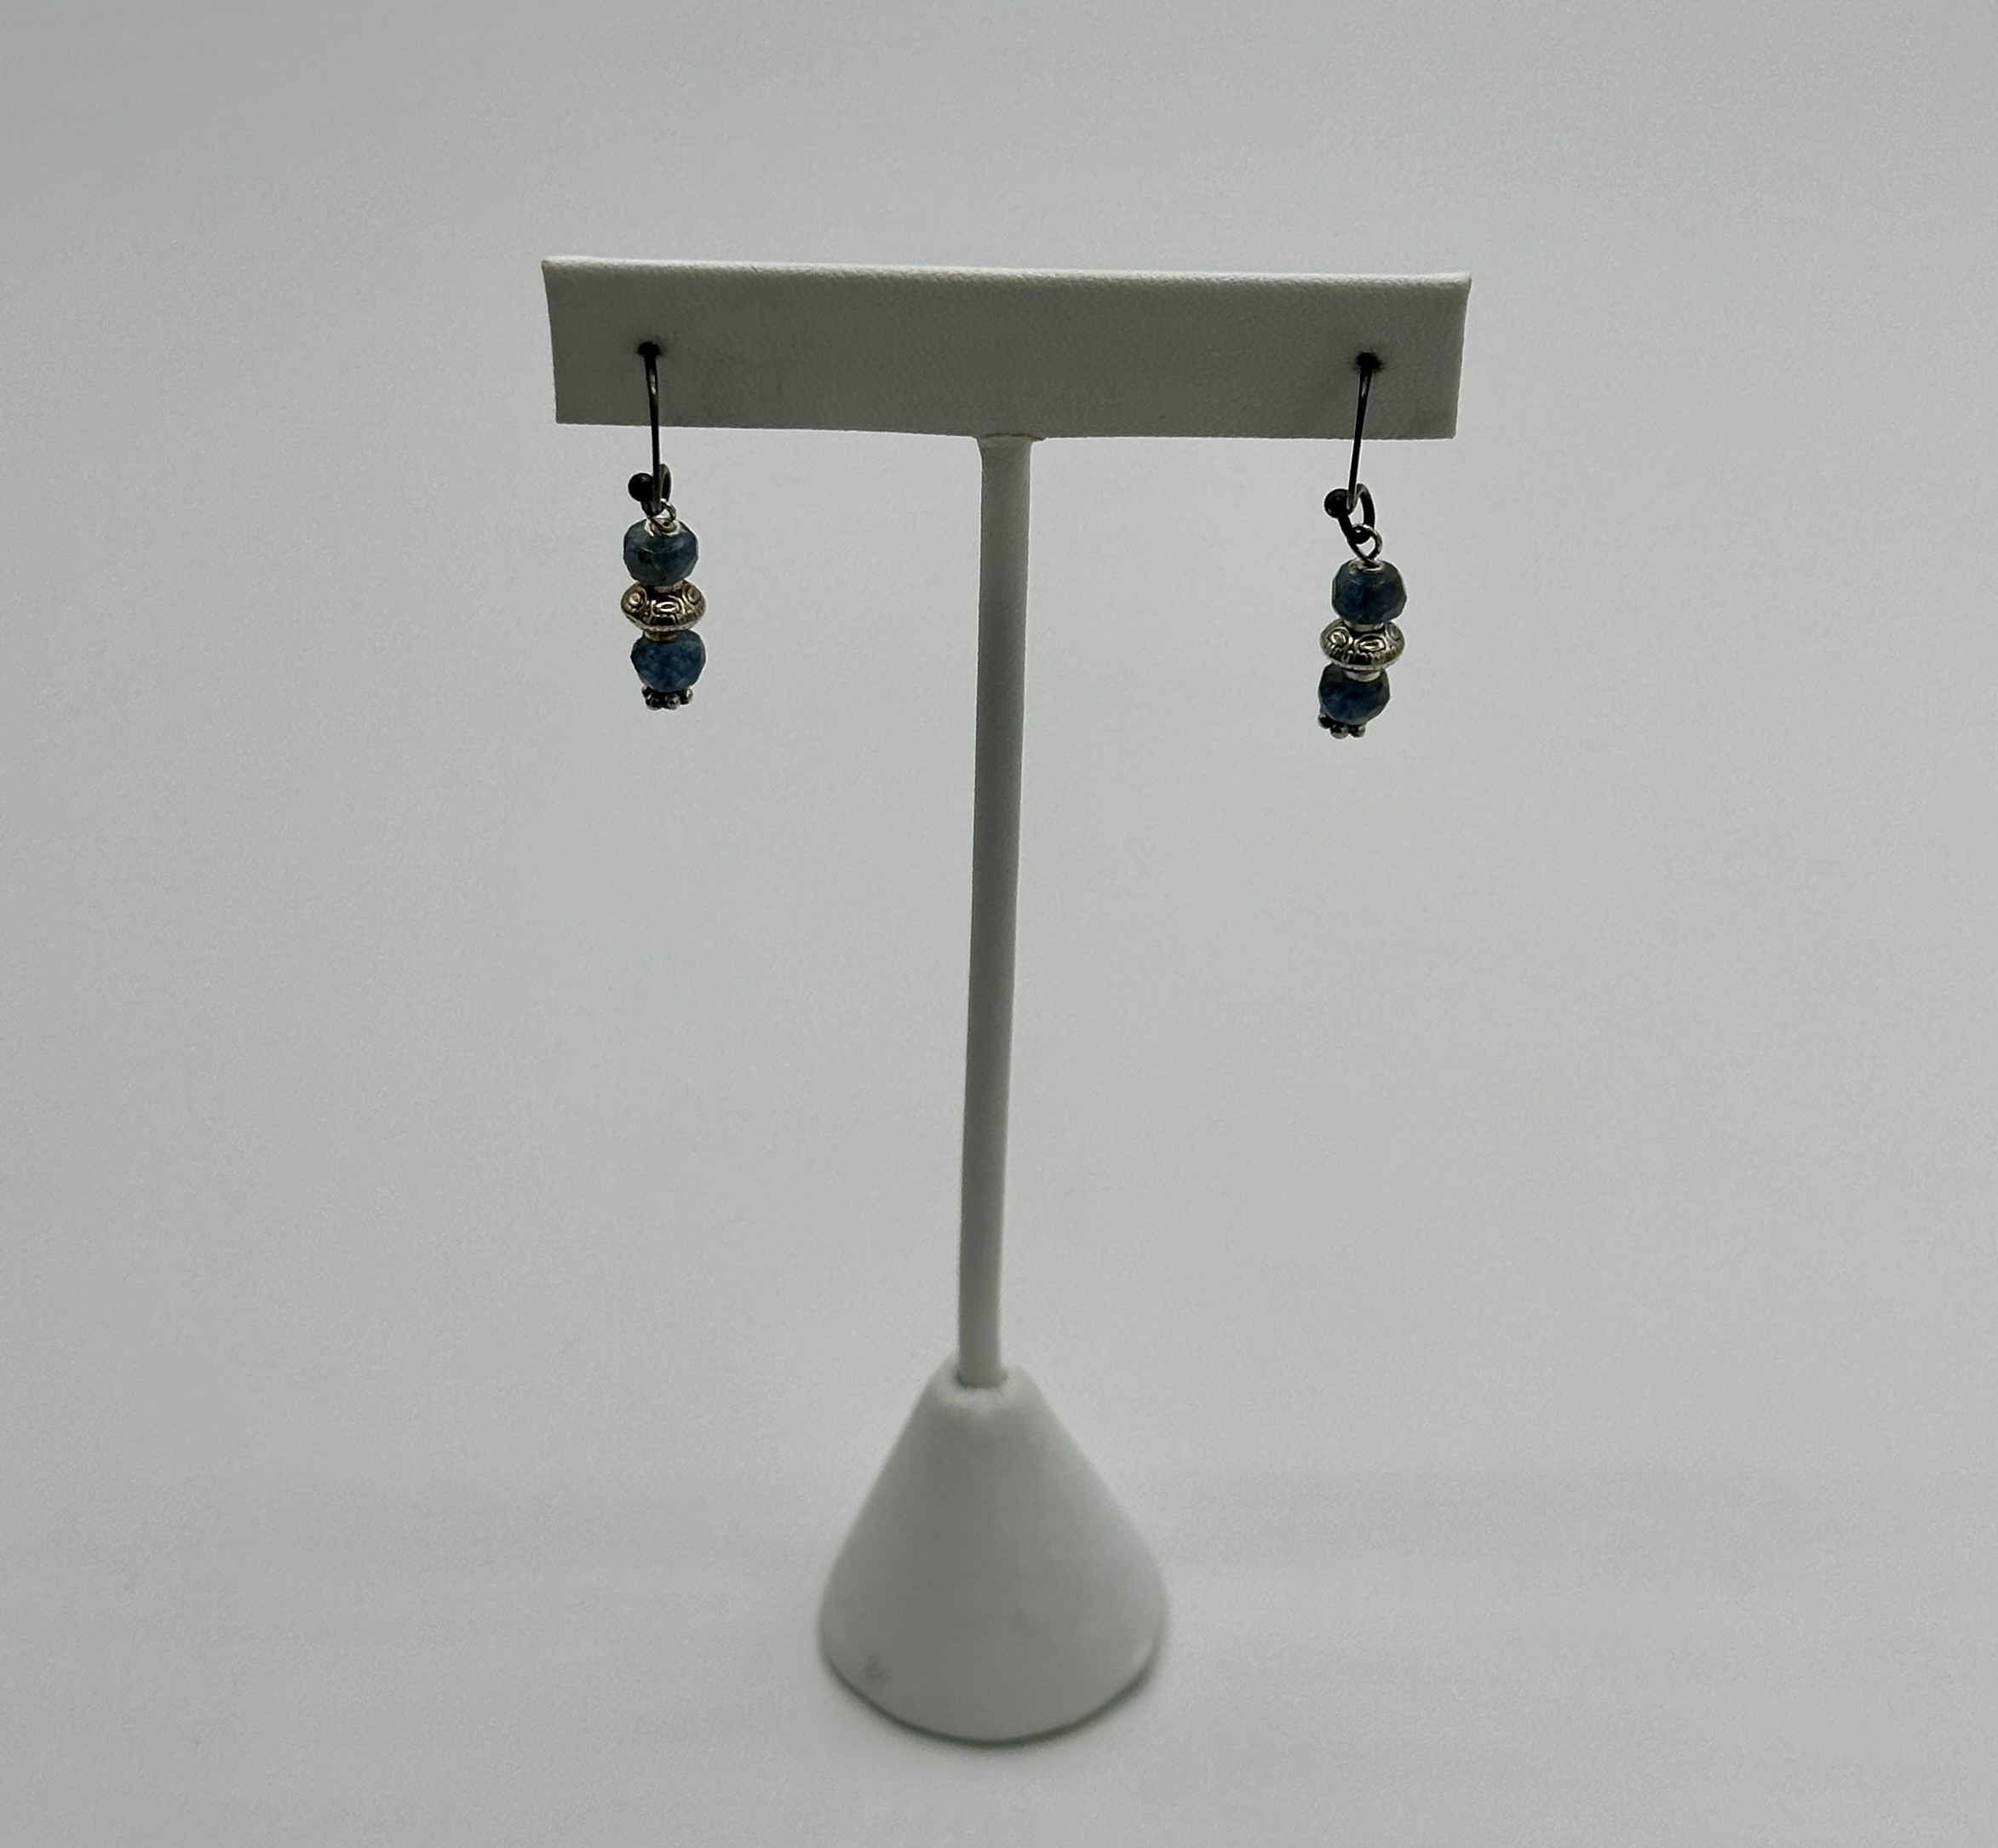 8 mm Moss Aqua in Bluish Tone, Rondell Sterling Earrings with Oxidized Sterling Hooks